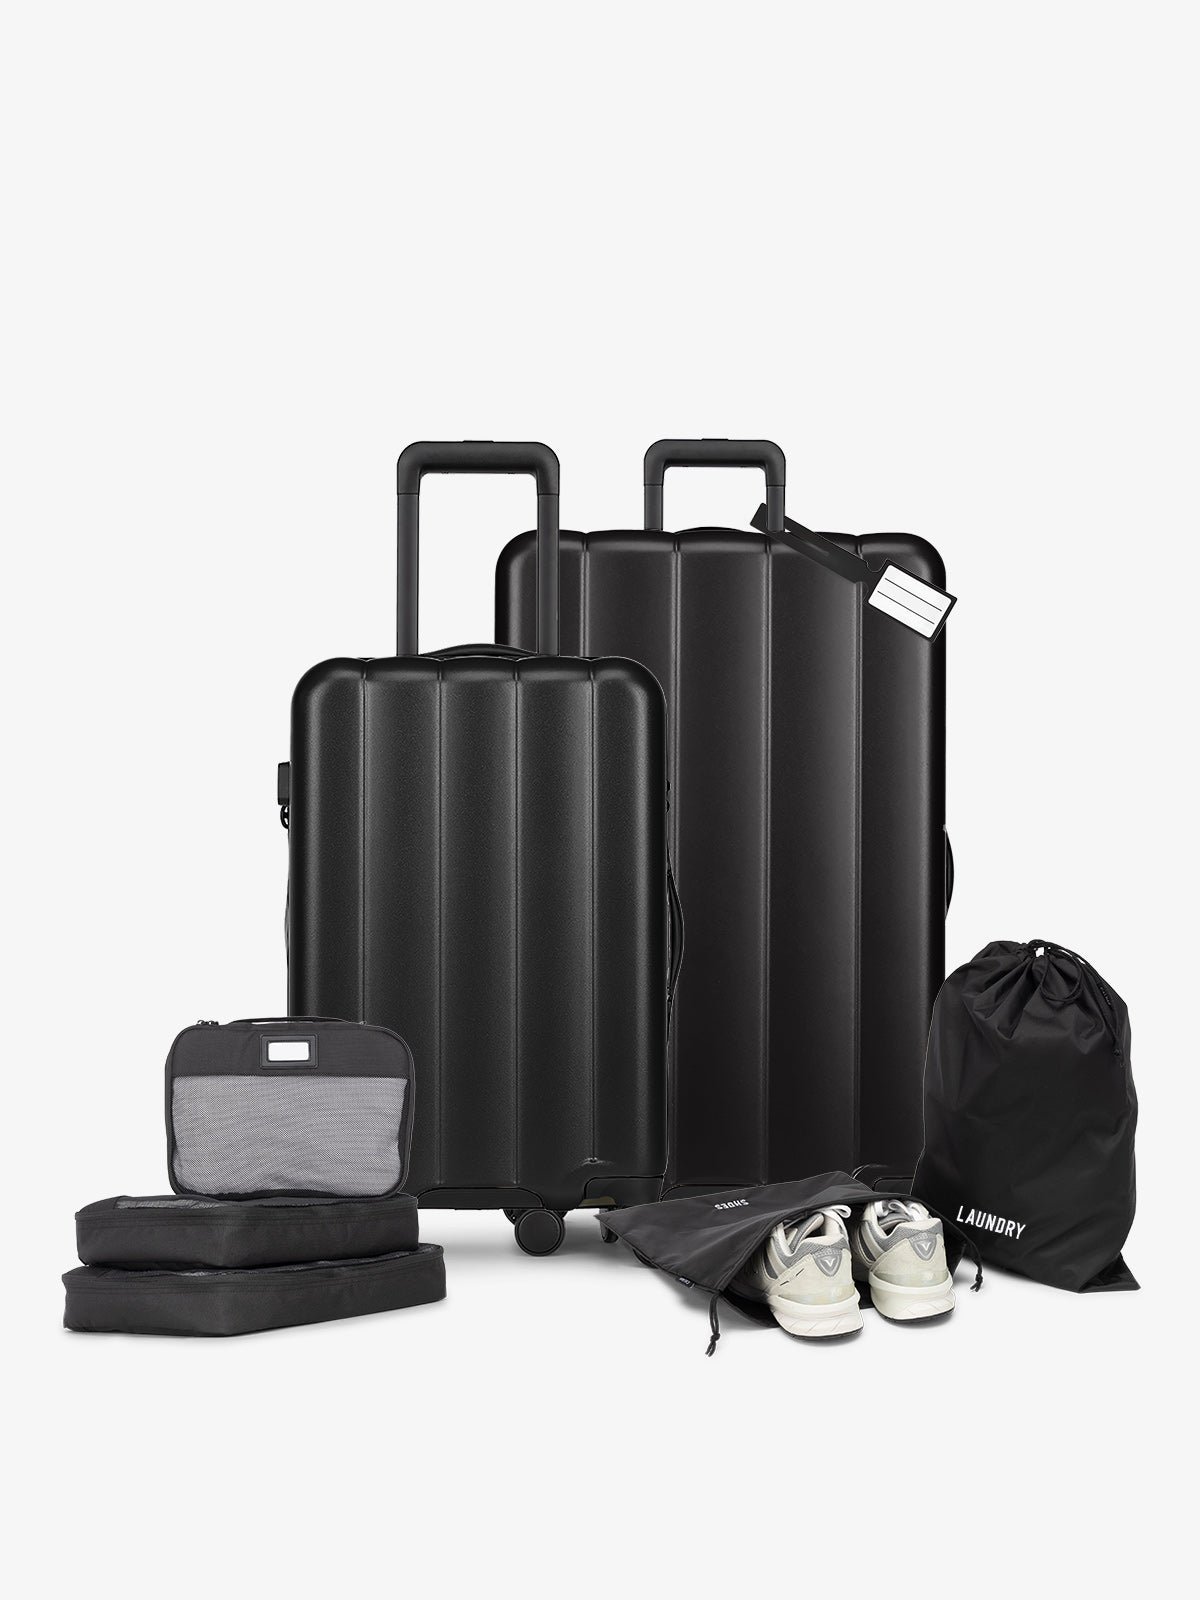 CALPAK starter bundle with carry-on, large luggage, packing cubes, pouches, and luggage tag